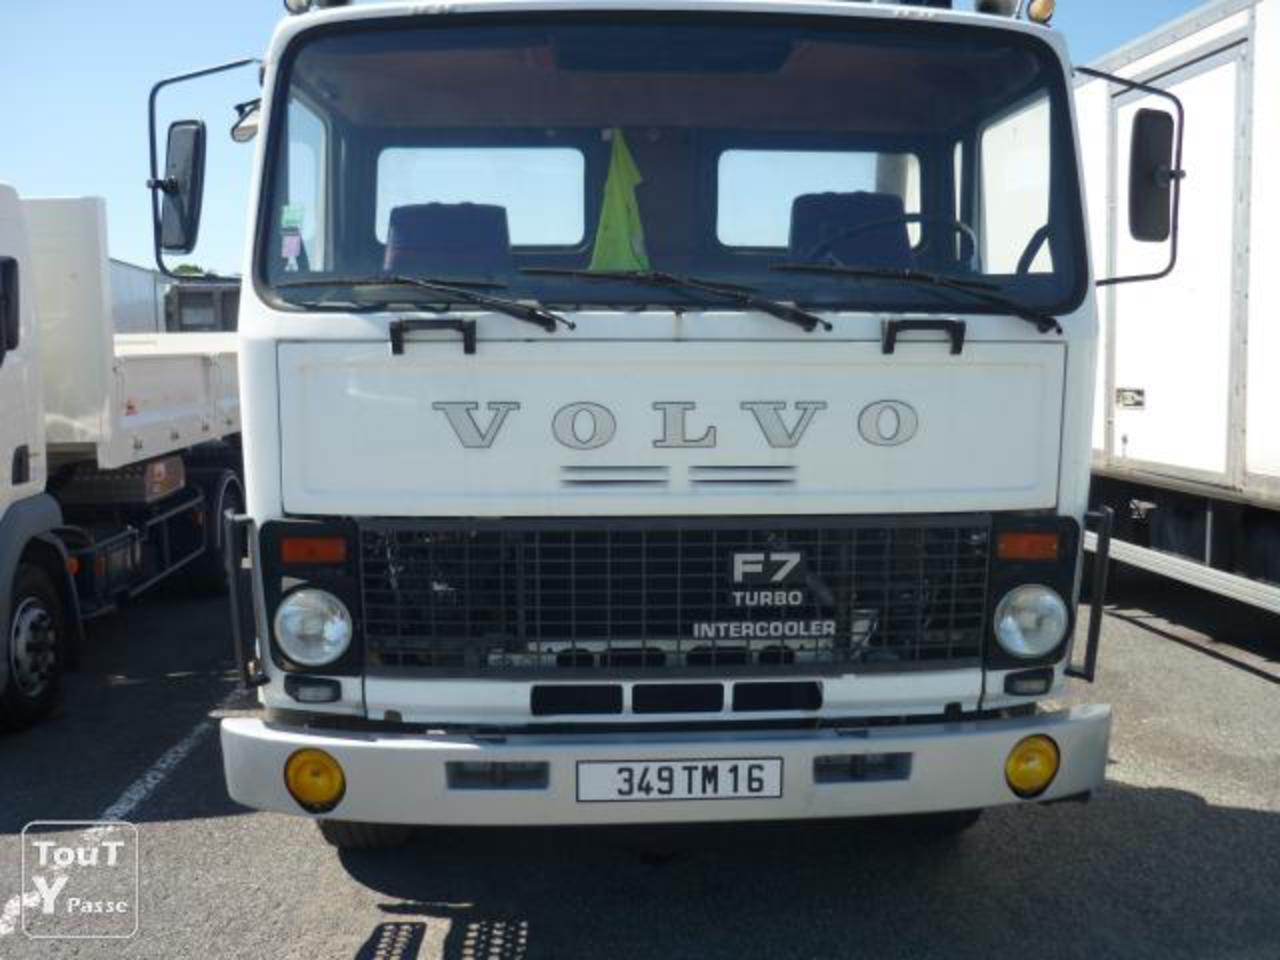 Volvo F7 Turbo 6. View Download Wallpaper. 640x480. Comments